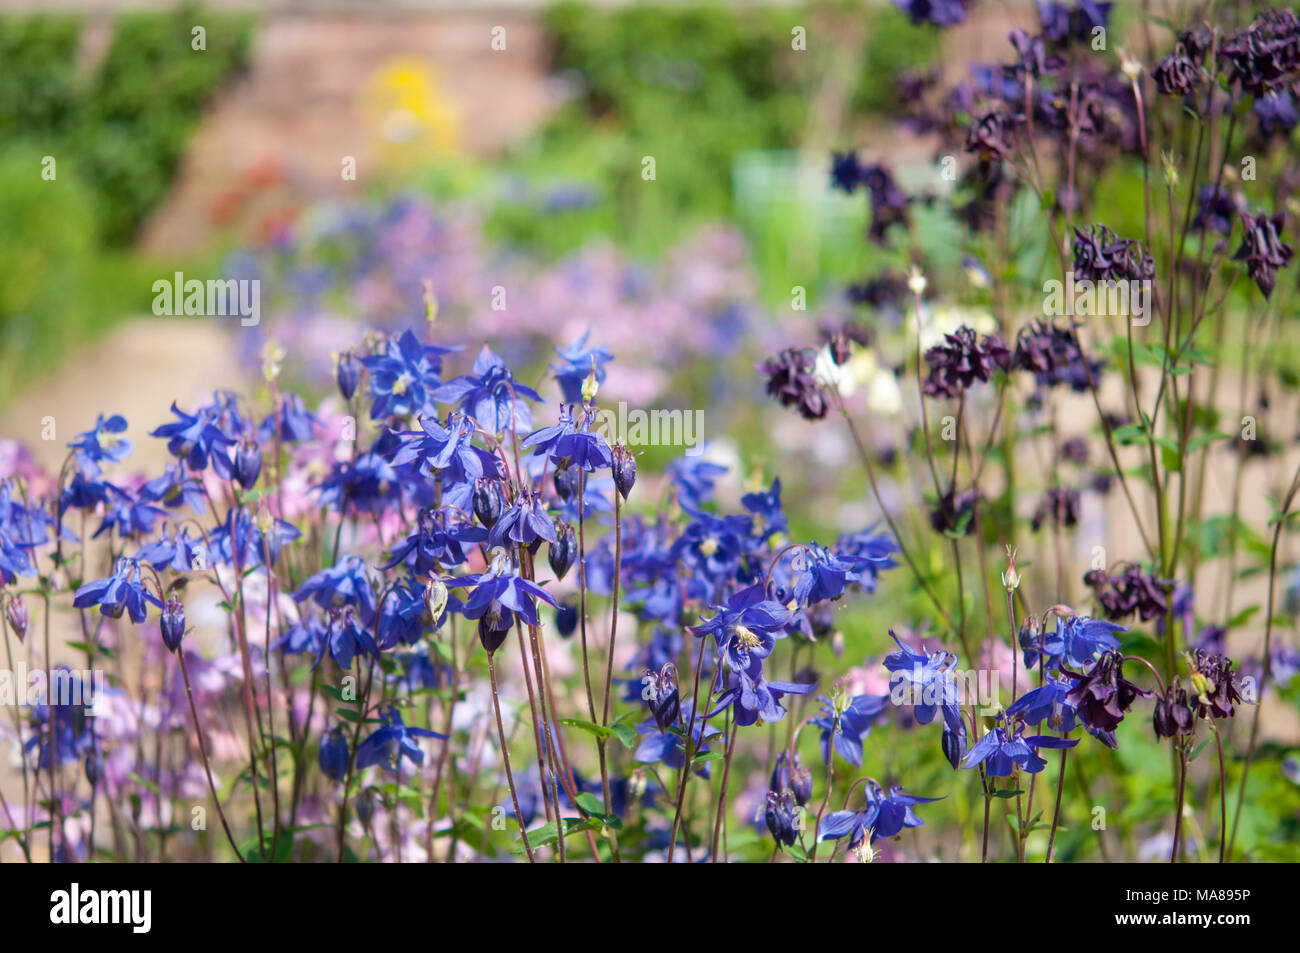 Blue and purple Aquilegia flowers in an English country garden. Stock Photo